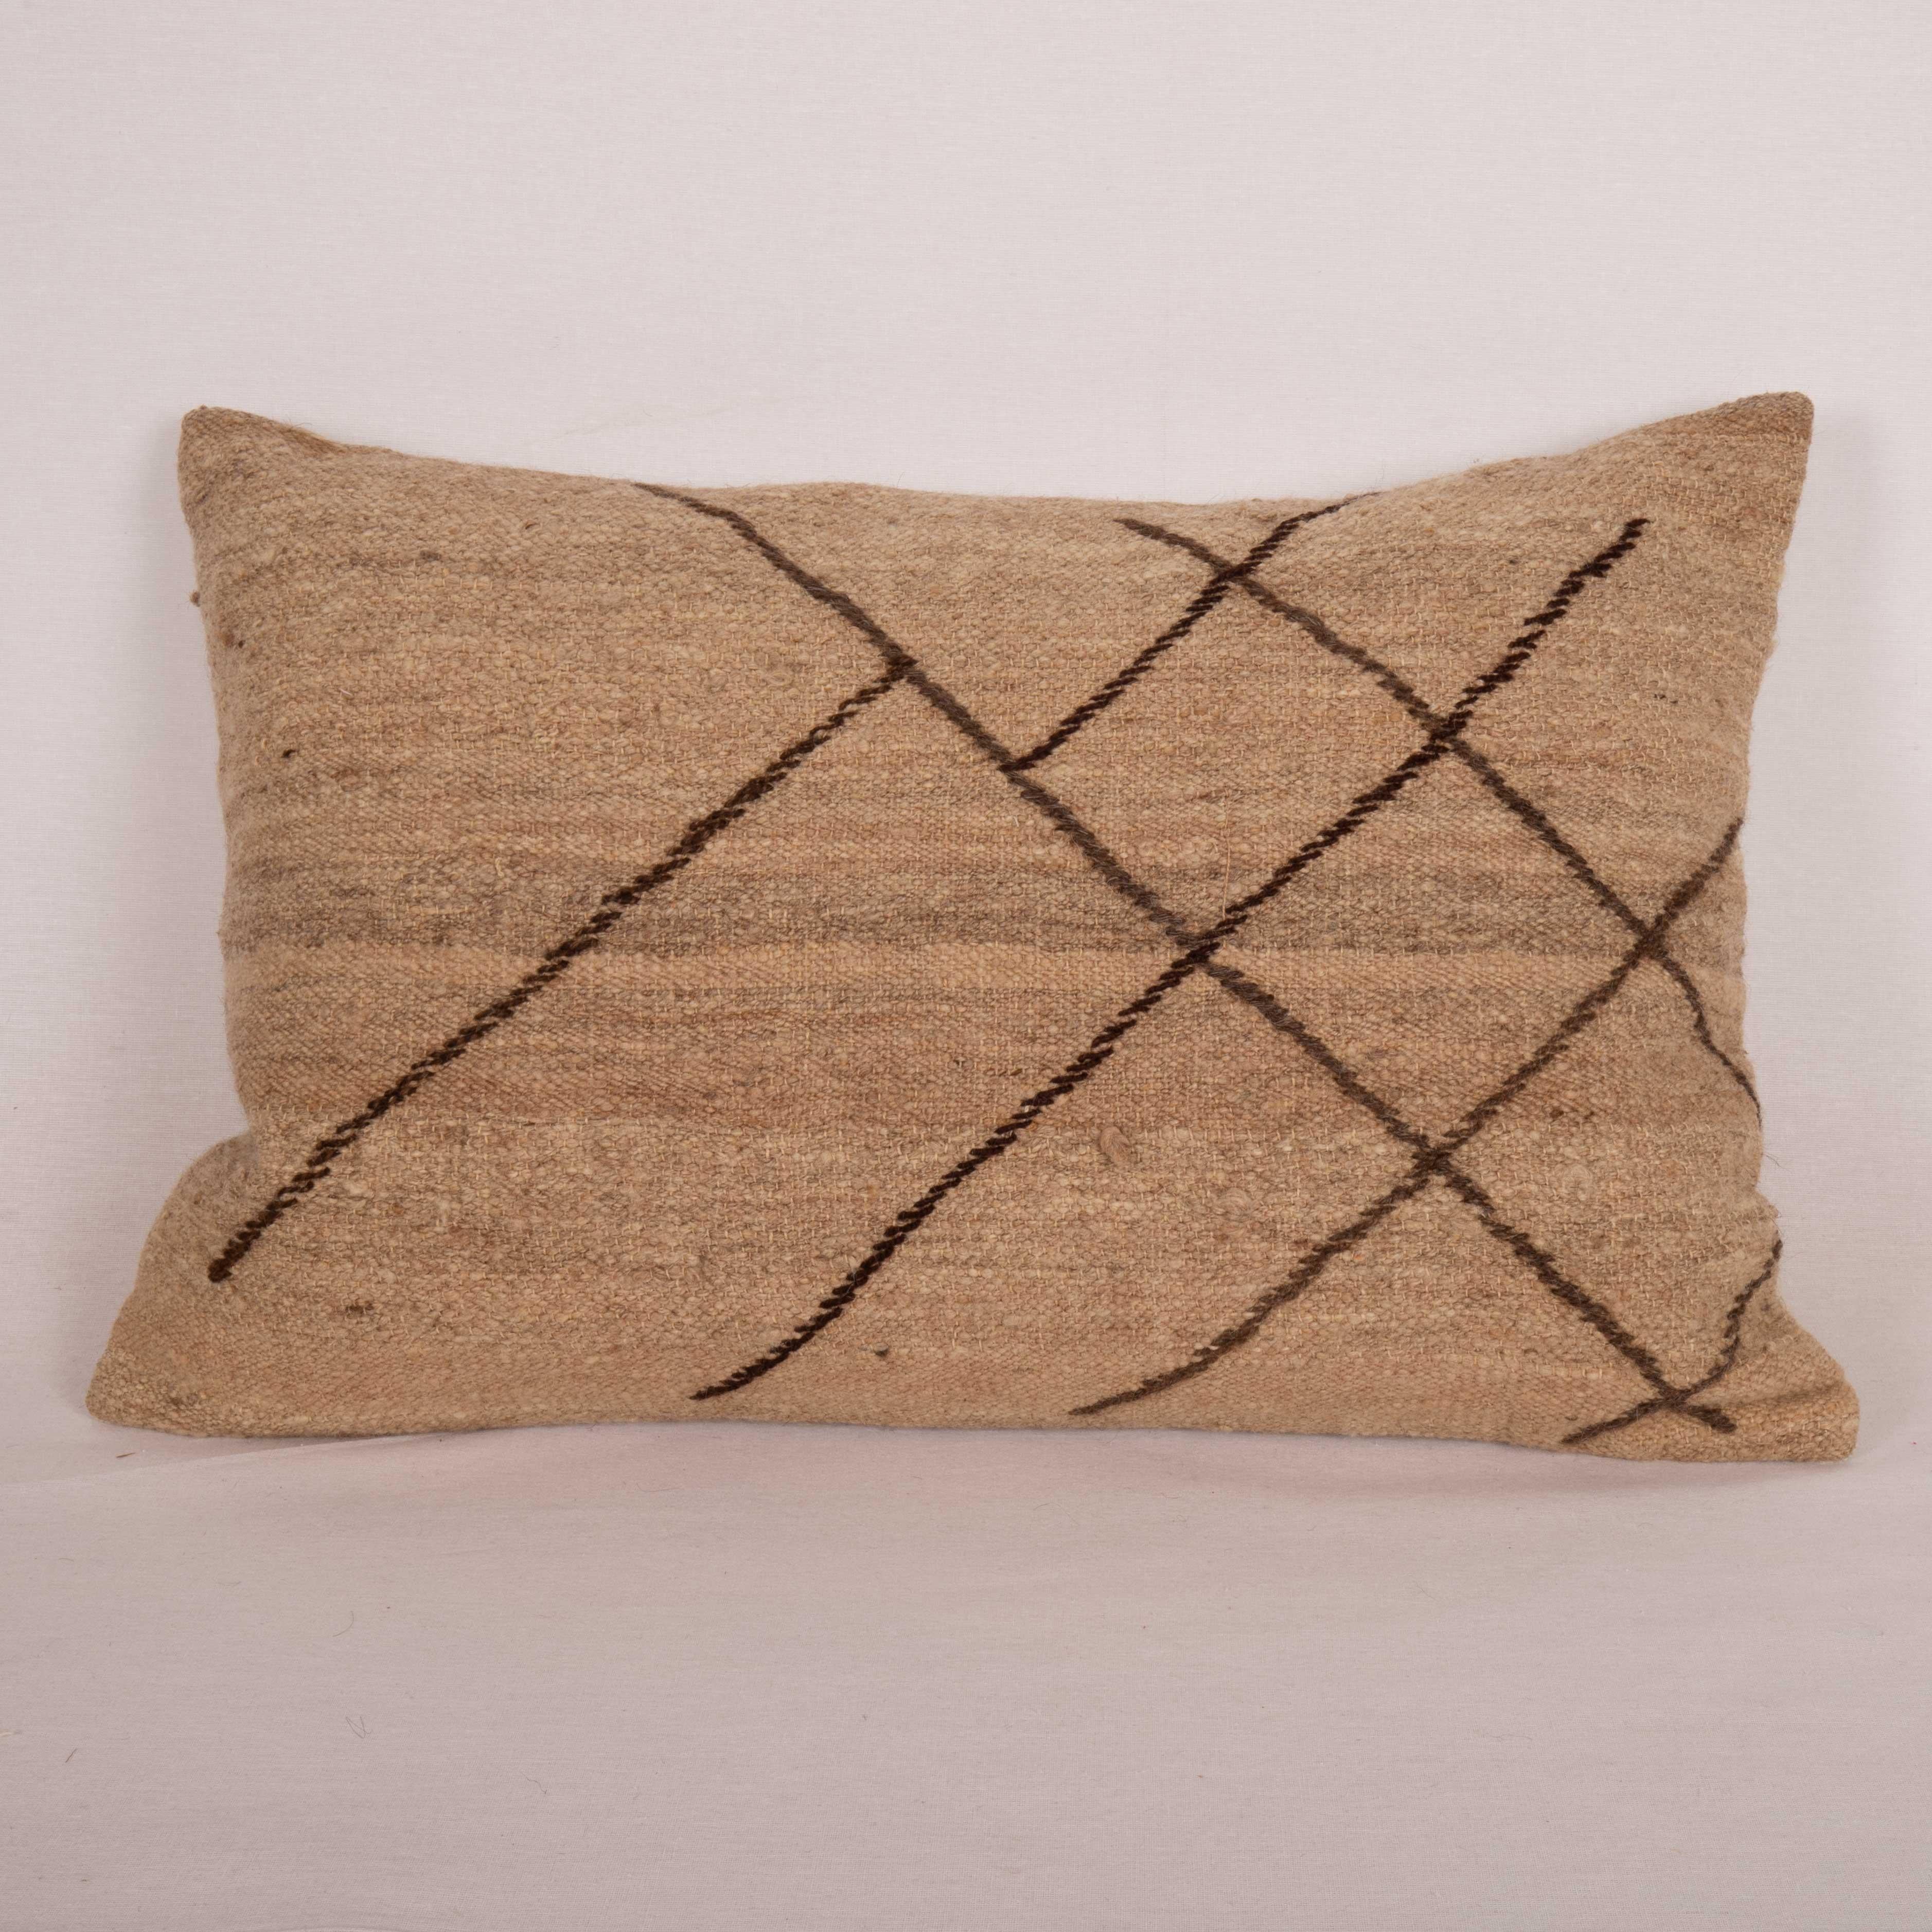 Neutral Pillow Case Made from a Vintage Wool Cover, Mid 20th C In Good Condition For Sale In Istanbul, TR